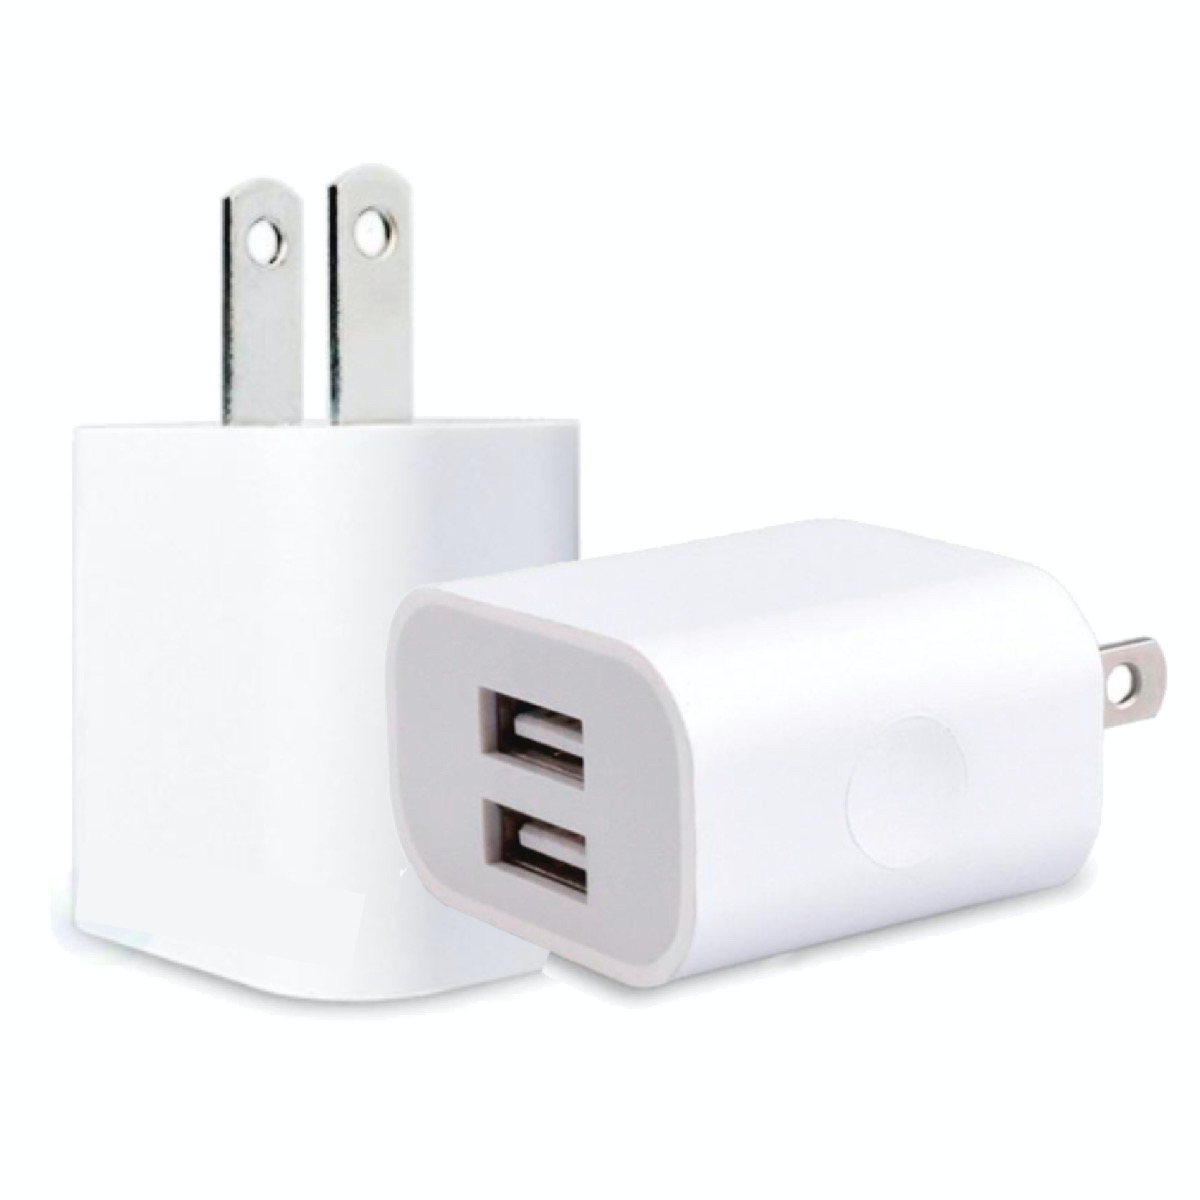 Dual Wall Charger